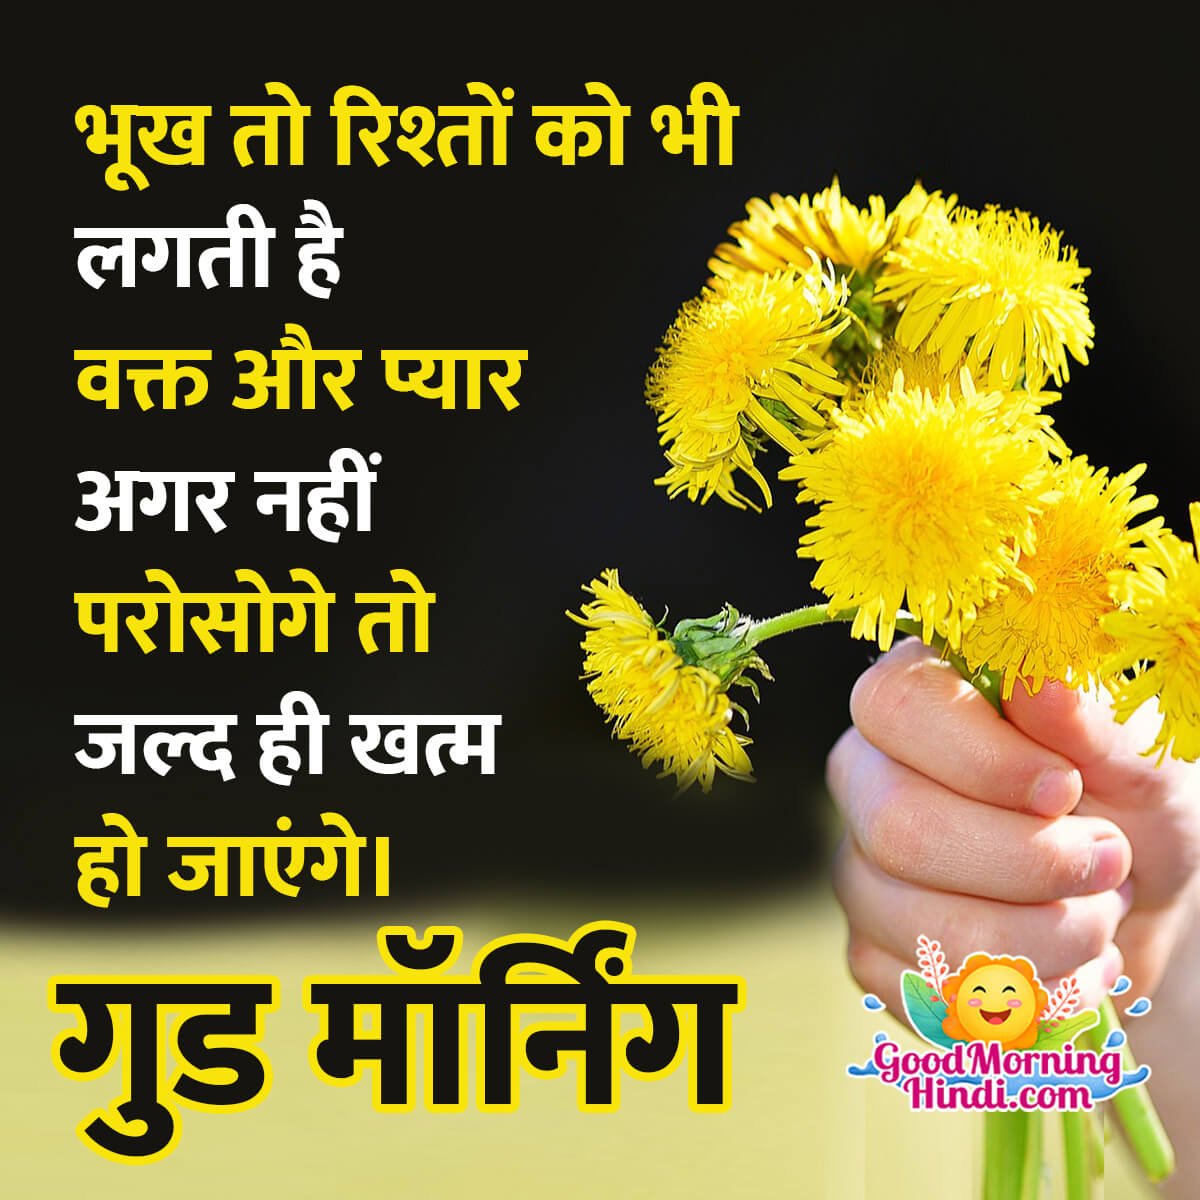 Best Good Morning Quotes In Hindi - Good Morning Wishes & Images ...